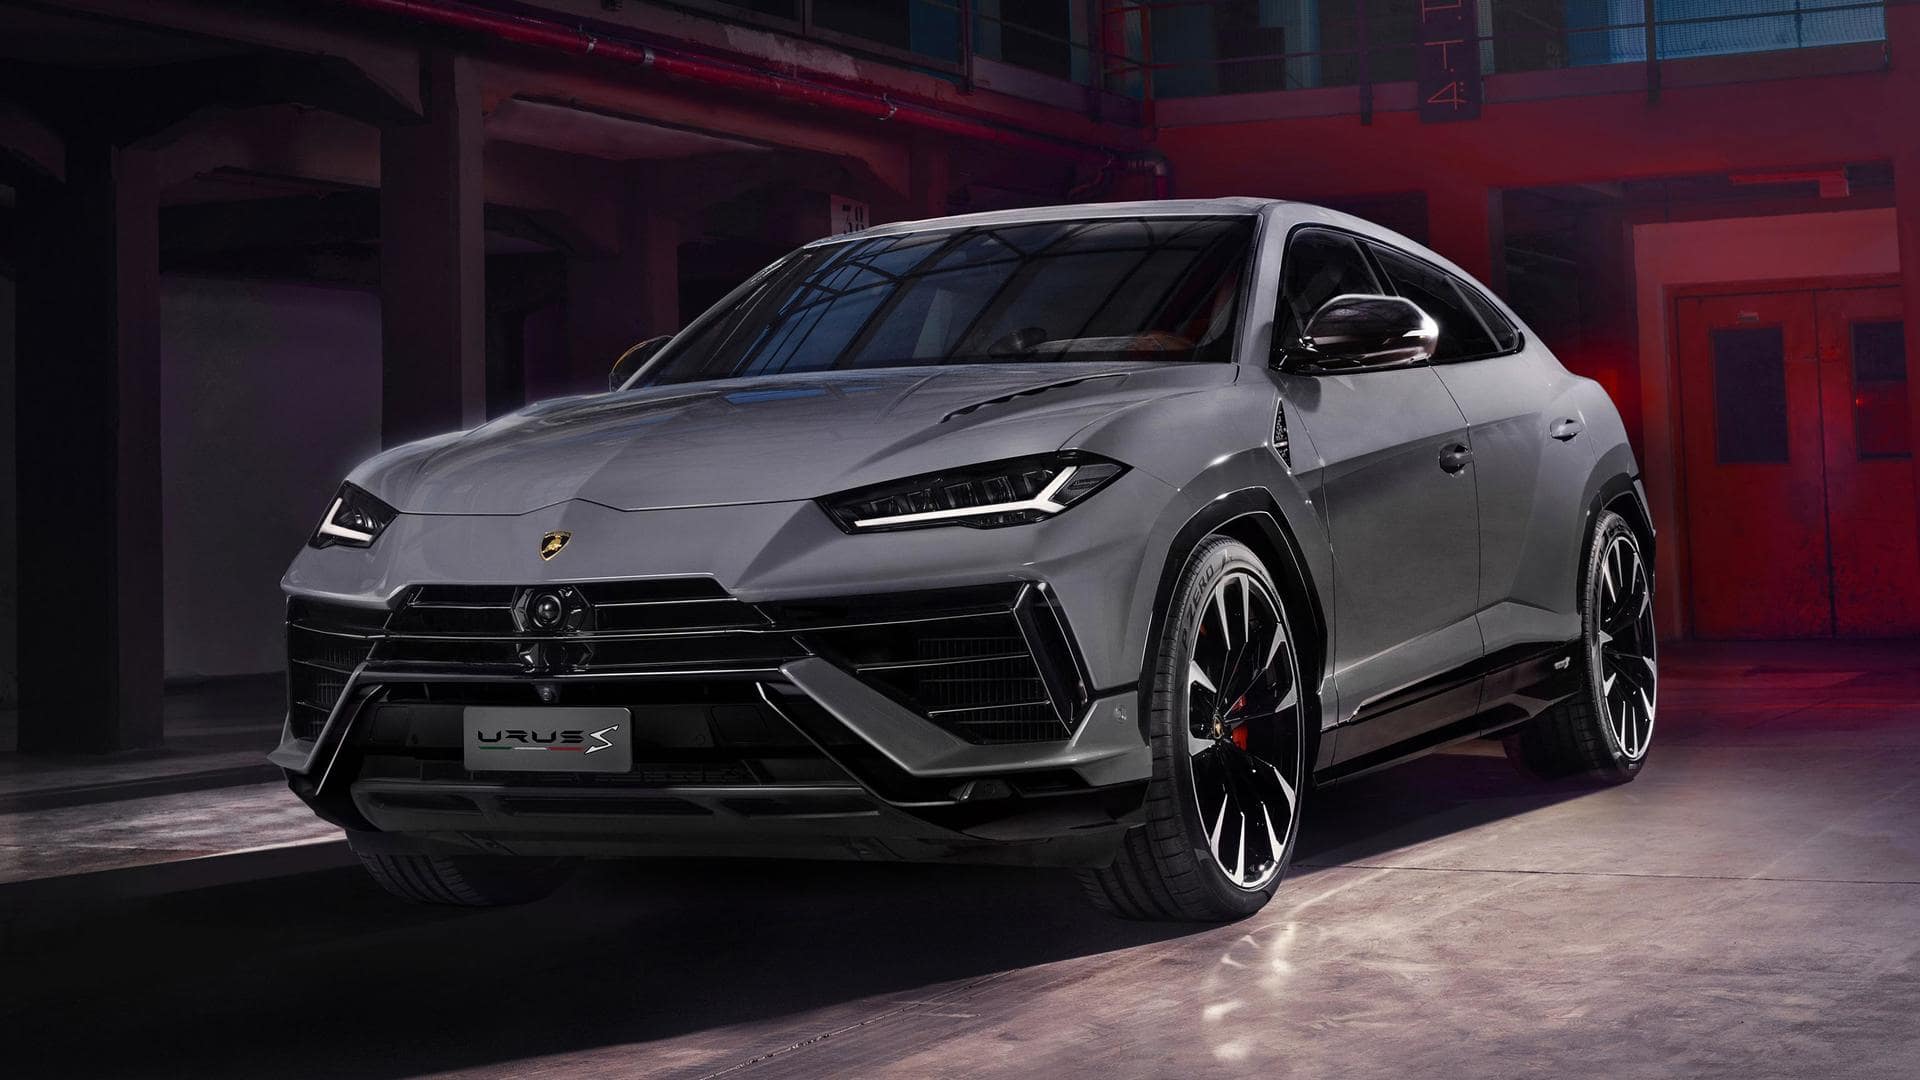 Lamborghini Urus S launched at Rs. 4.18 crore: Check features